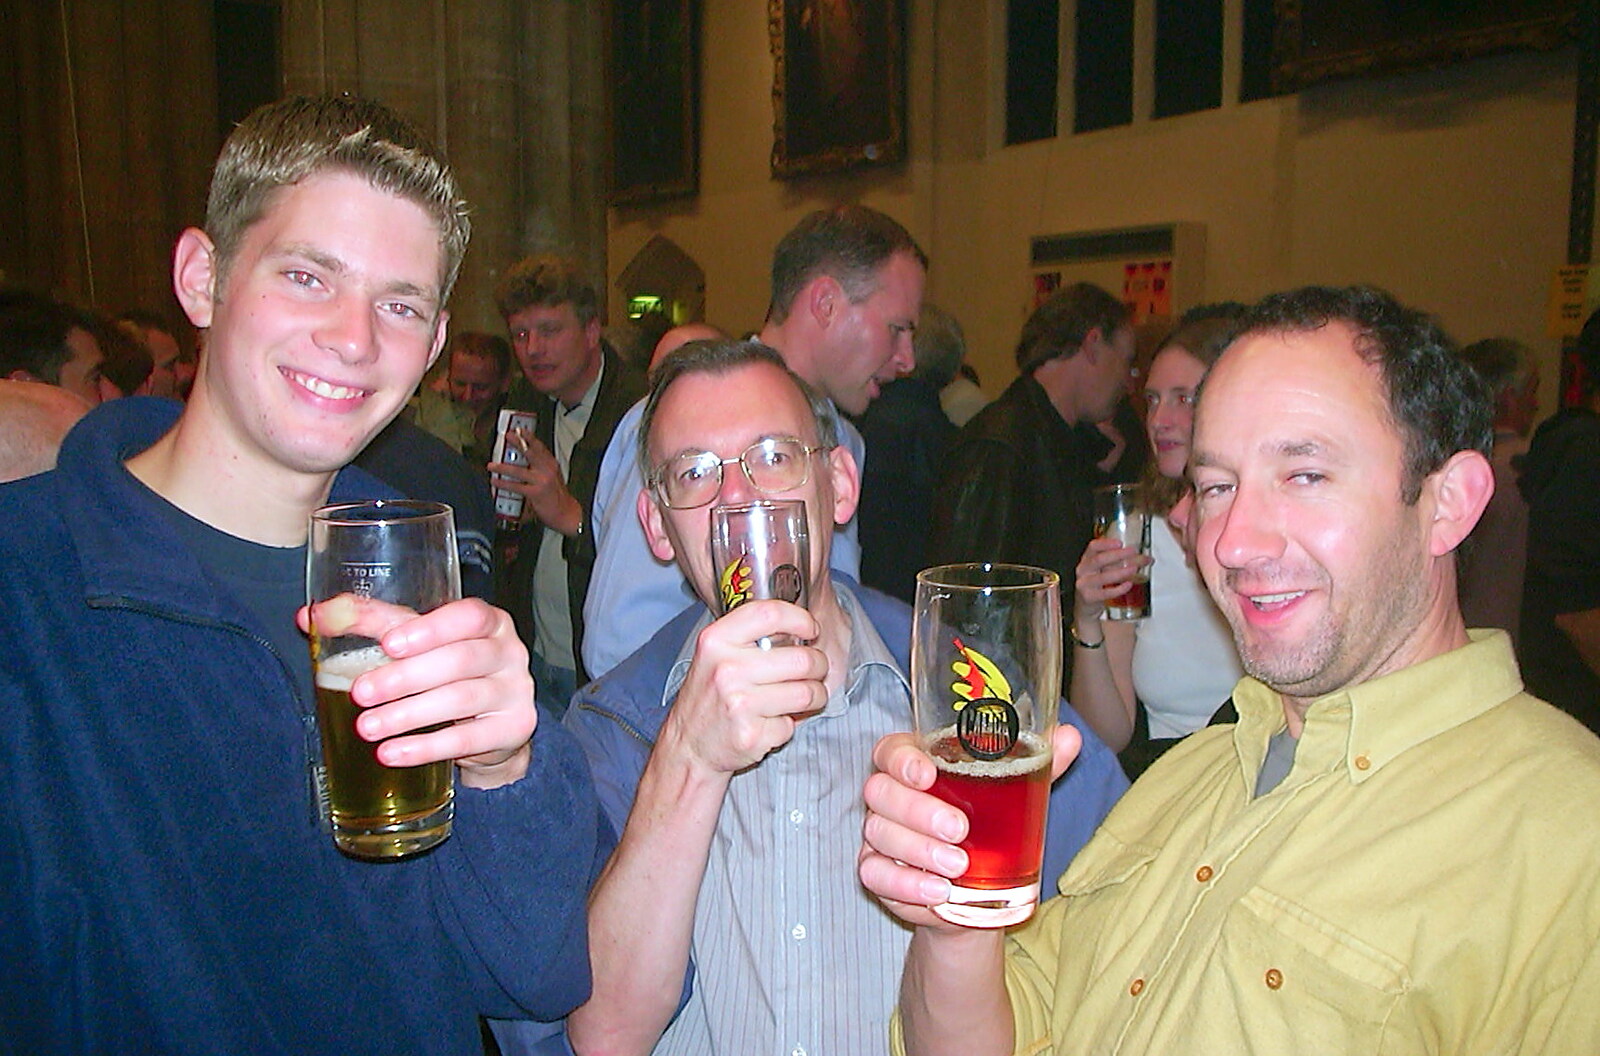 The Boy Phil, Ping-pong Peter and DH from The Norwich Beer Festival, St. Andrew's Hall, Norwich - 26th October 2002